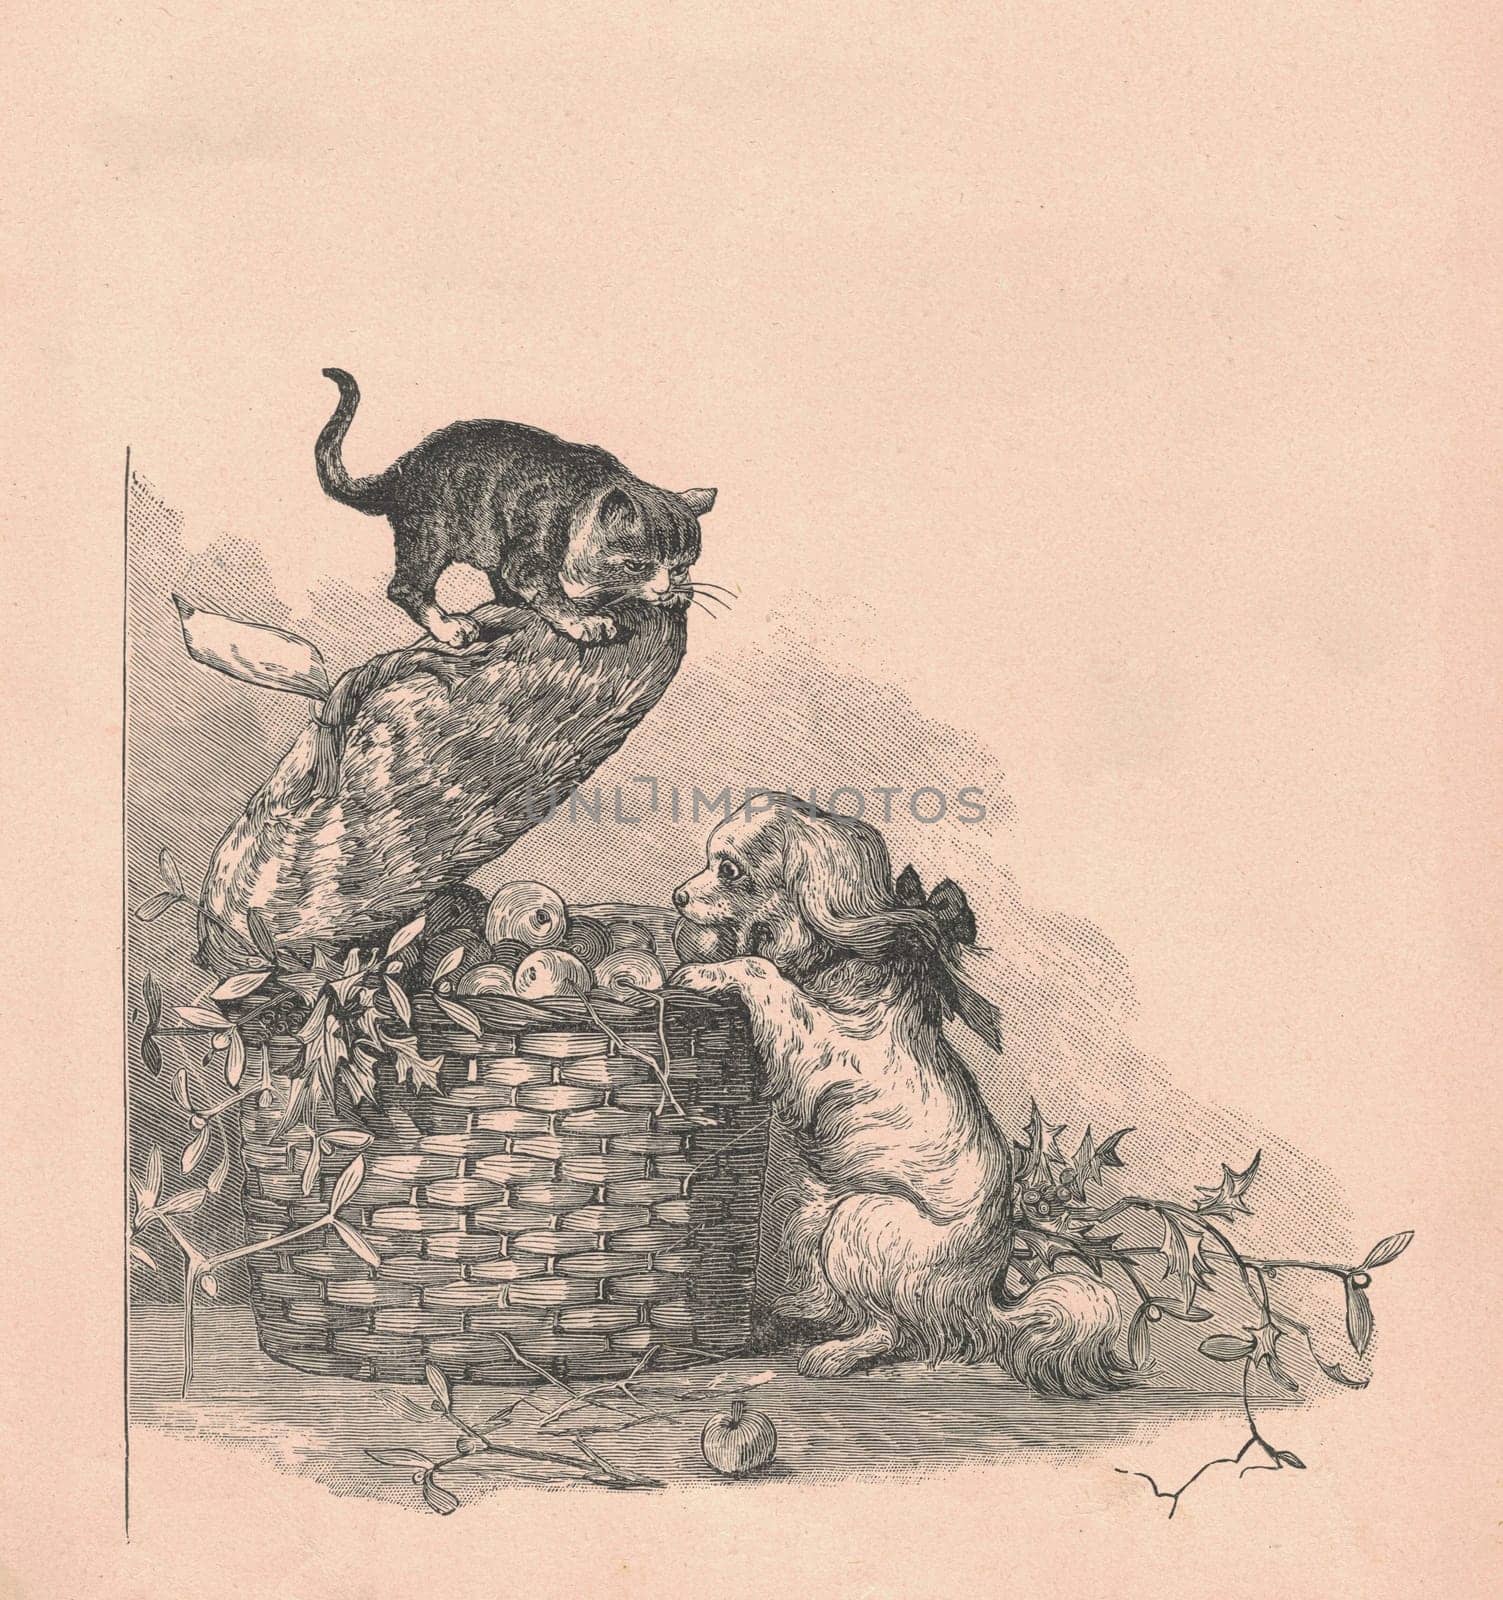 Black and white antique illustration shows a cute puppy and kitten play with apples. Vintage drawing shows the a cute puppy and kitten play with apples. Old picture from fairy tale book. Storybook illustration published 1910. A fairy tale, fairytale, wonder tale, magic tale, fairy story or Marchen is an instance of folklore genre that takes the form of a short story. Such stories typically feature mythical entities such as dwarfs, dragons, elves, fairies and Peris, giants, Divs, gnomes, goblins, griffins, mermaids, talking animals, trolls, unicorns, or witches, and usually magic or enchantments.